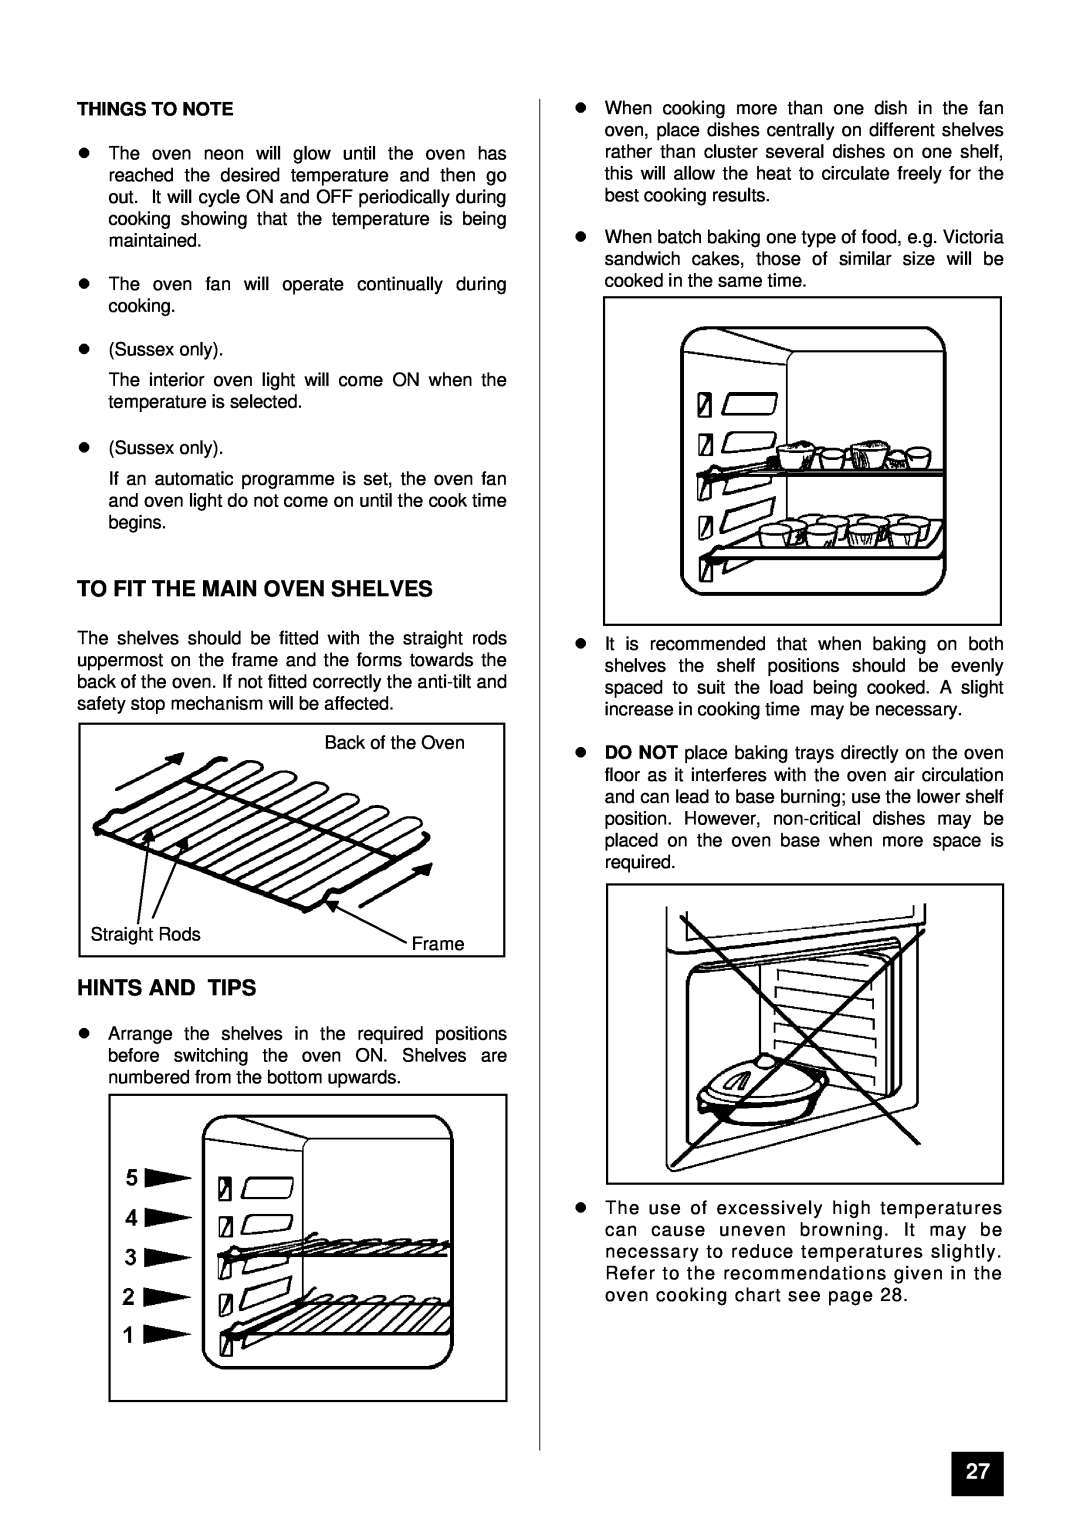 Tricity Bendix SUSSEX, SOMERSET installation instructions To Fit The Main Oven Shelves, lHINTS AND TIPS, Things To Note 